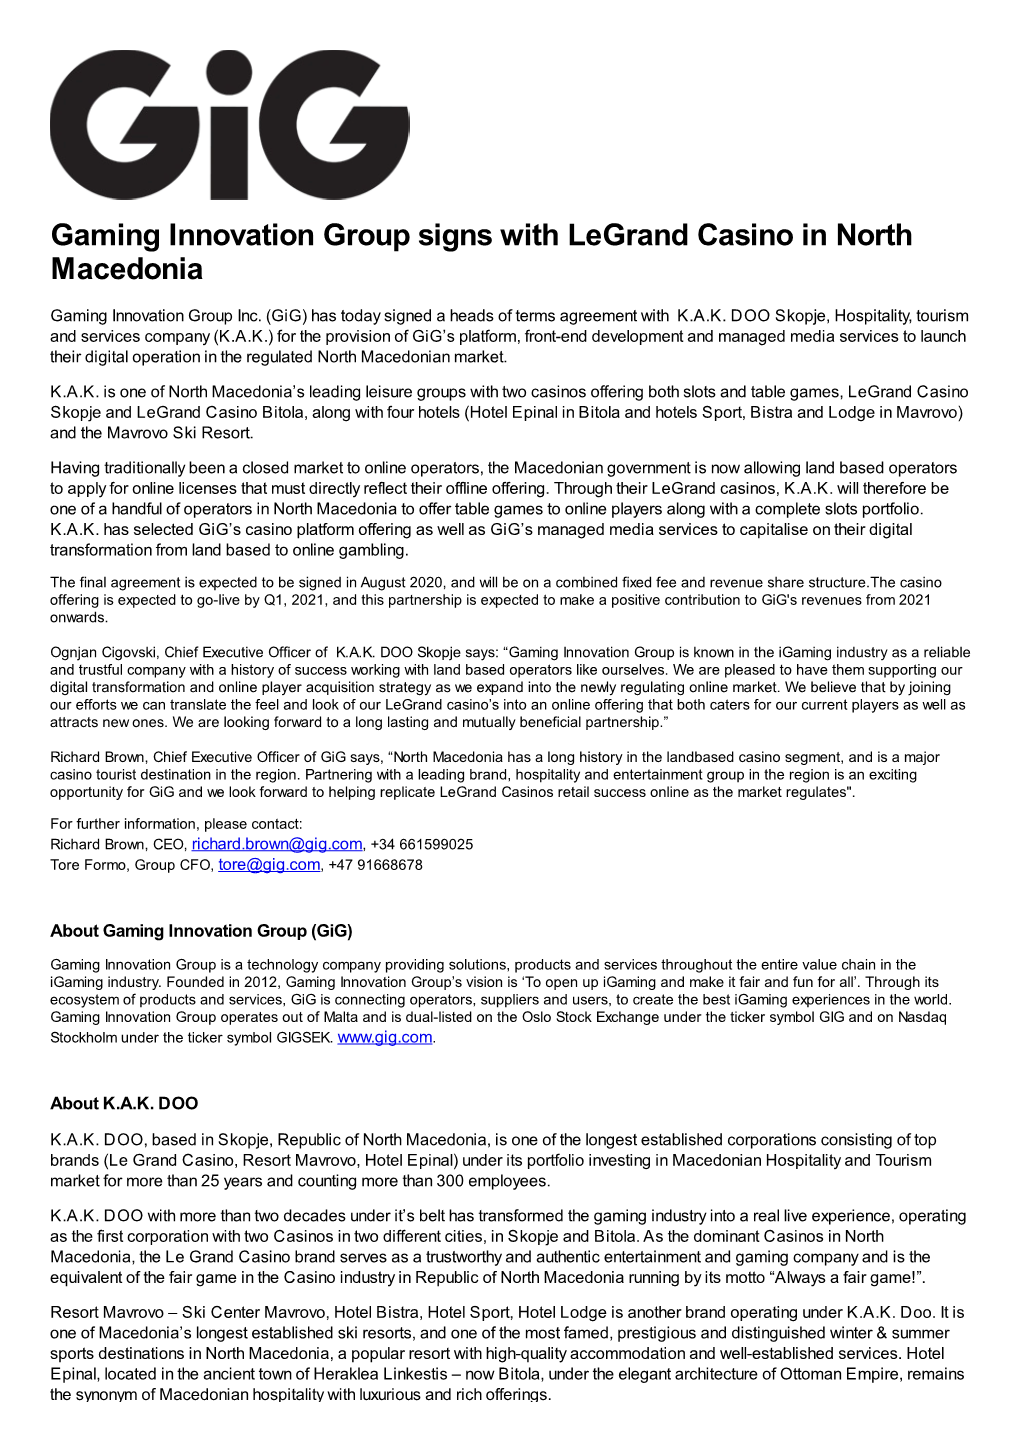 Gaming Innovation Group Signs with Legrand Casino in North Macedonia